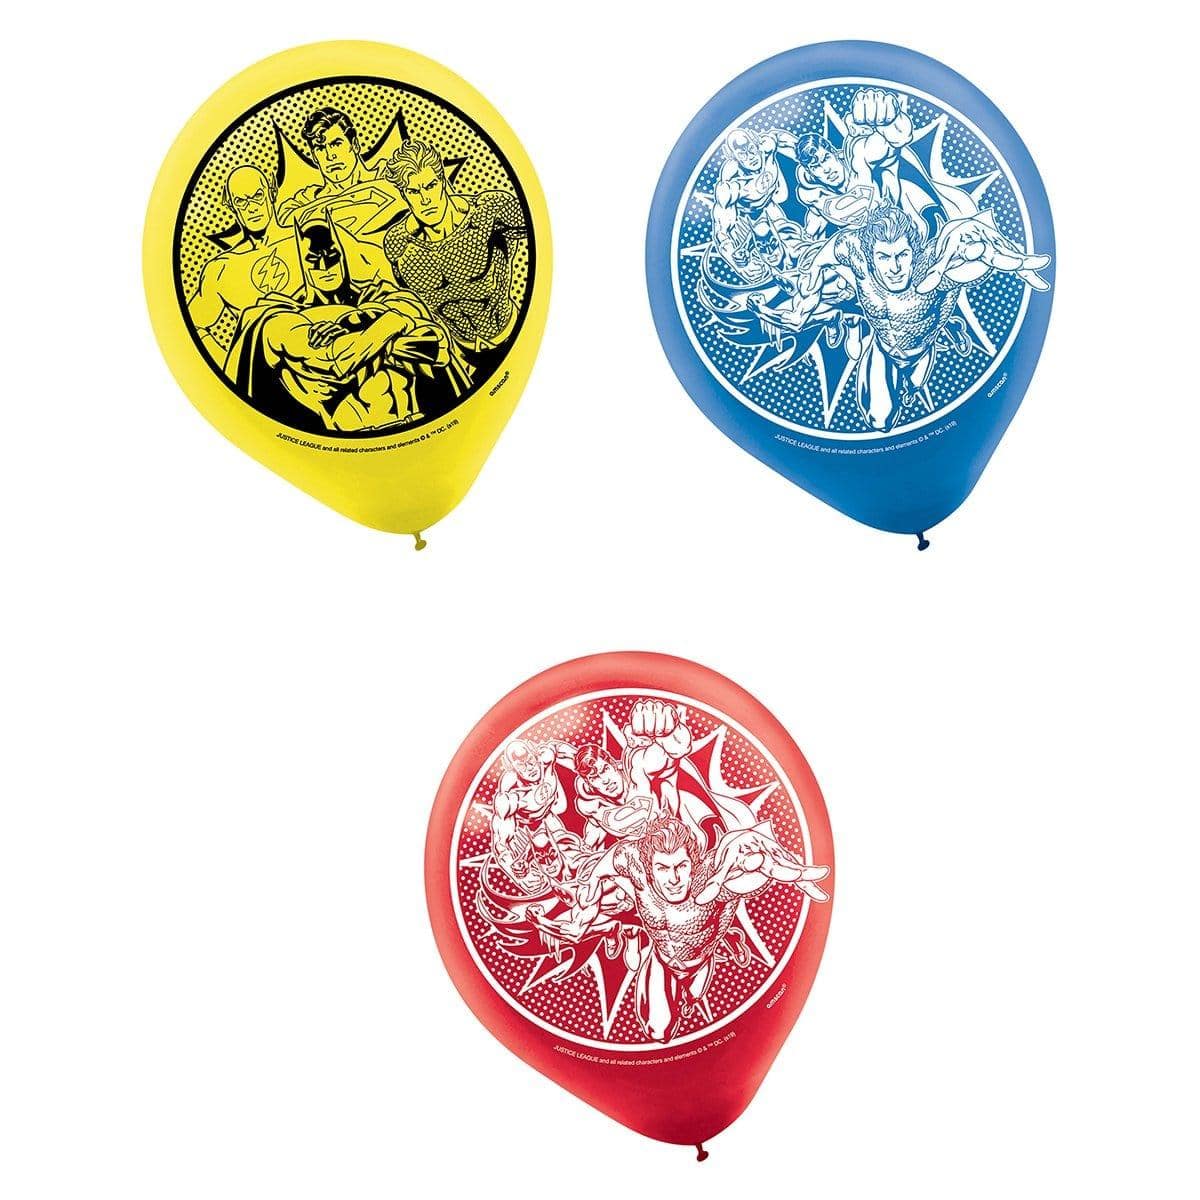 Buy Kids Birthday Justice League latex balloons 12 inches, 6 per package sold at Party Expert